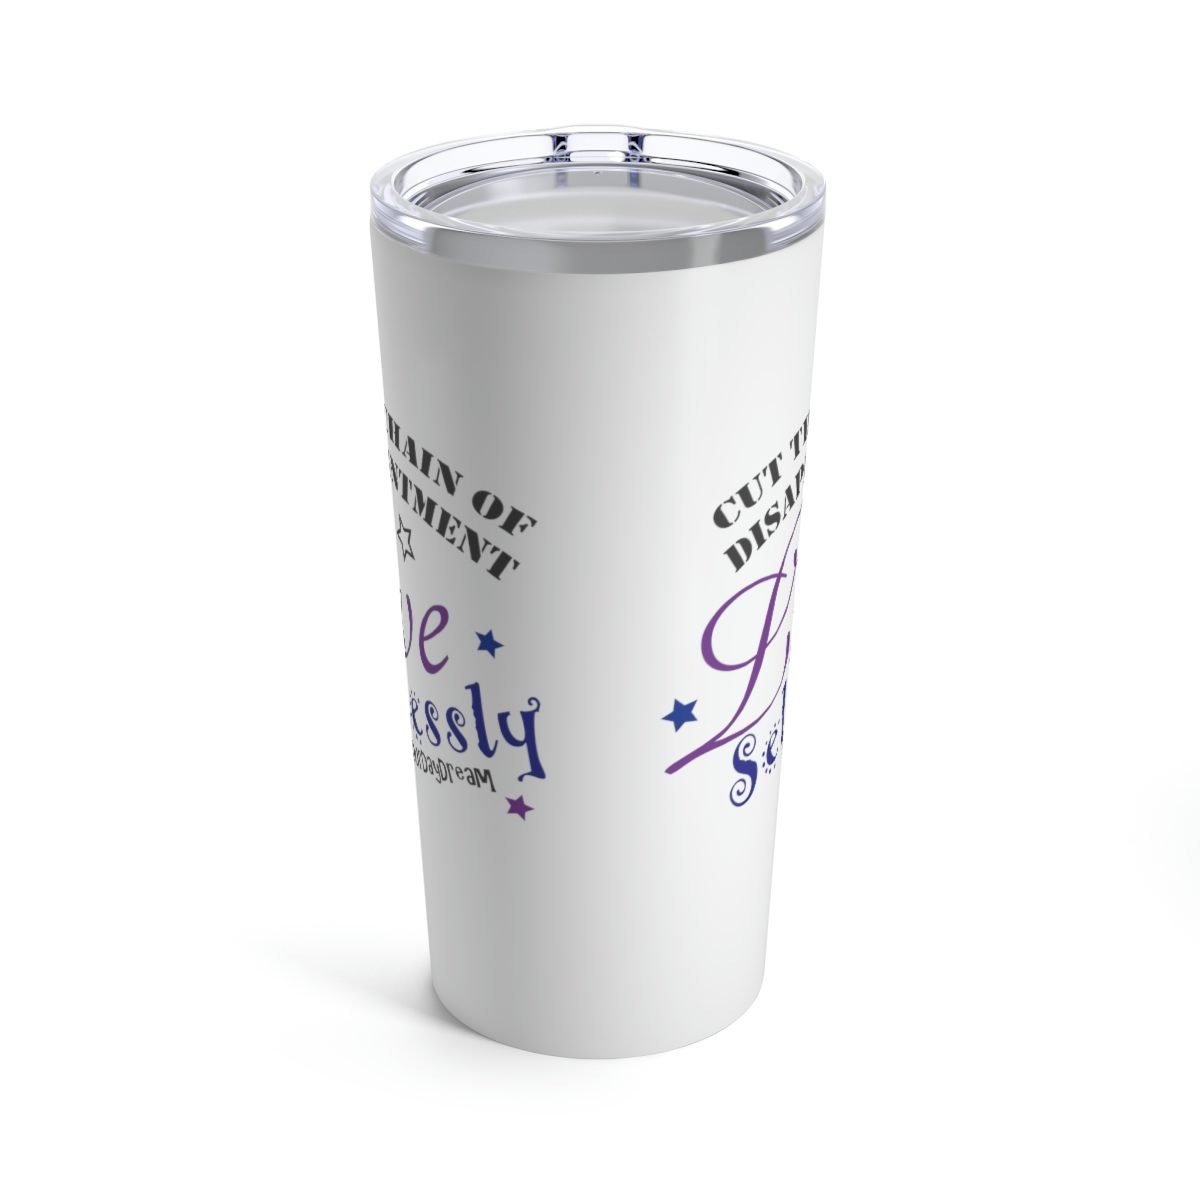 OurDayDream – Live Selflessly 20 oz Stainless Steel Tumbler